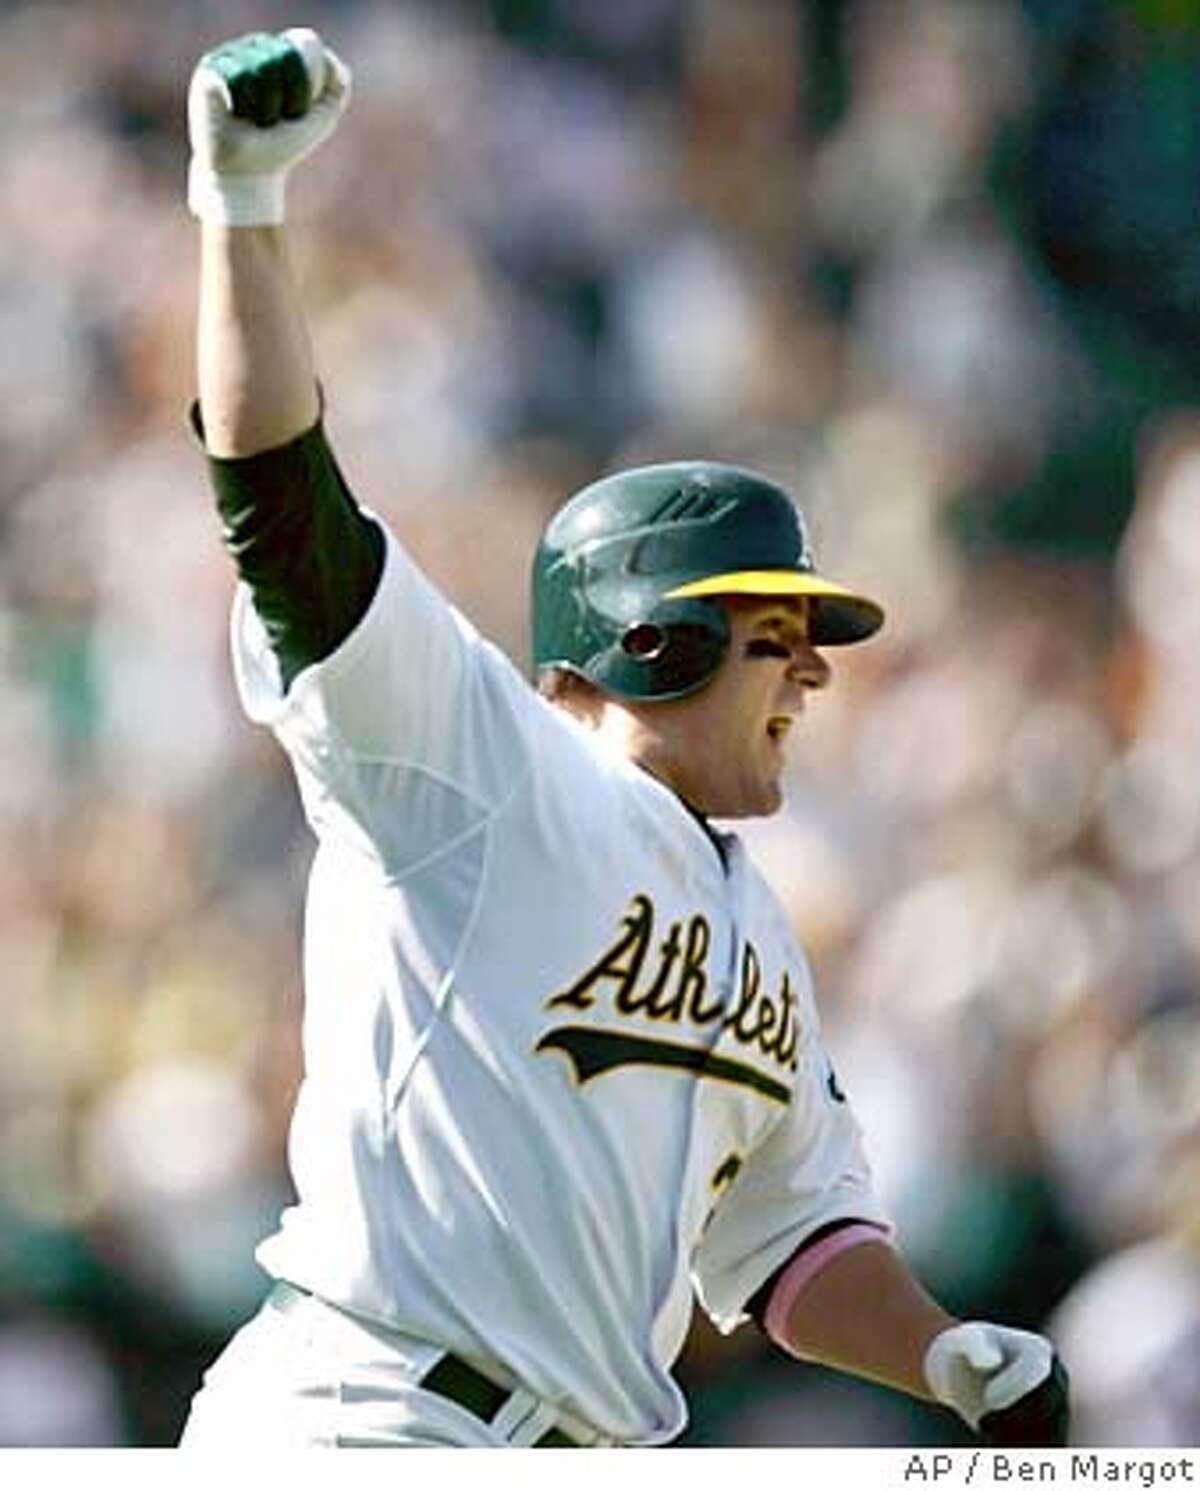 Oakland Athletics' Jack Cust celebrates after hitting a three-run walk-off home run off Cleveland Indians' Fernando Cabrera to win the baseball game 10-7 Sunday, May 13, 2007, in Oakland, Calif. (AP Photo/Ben Margot)